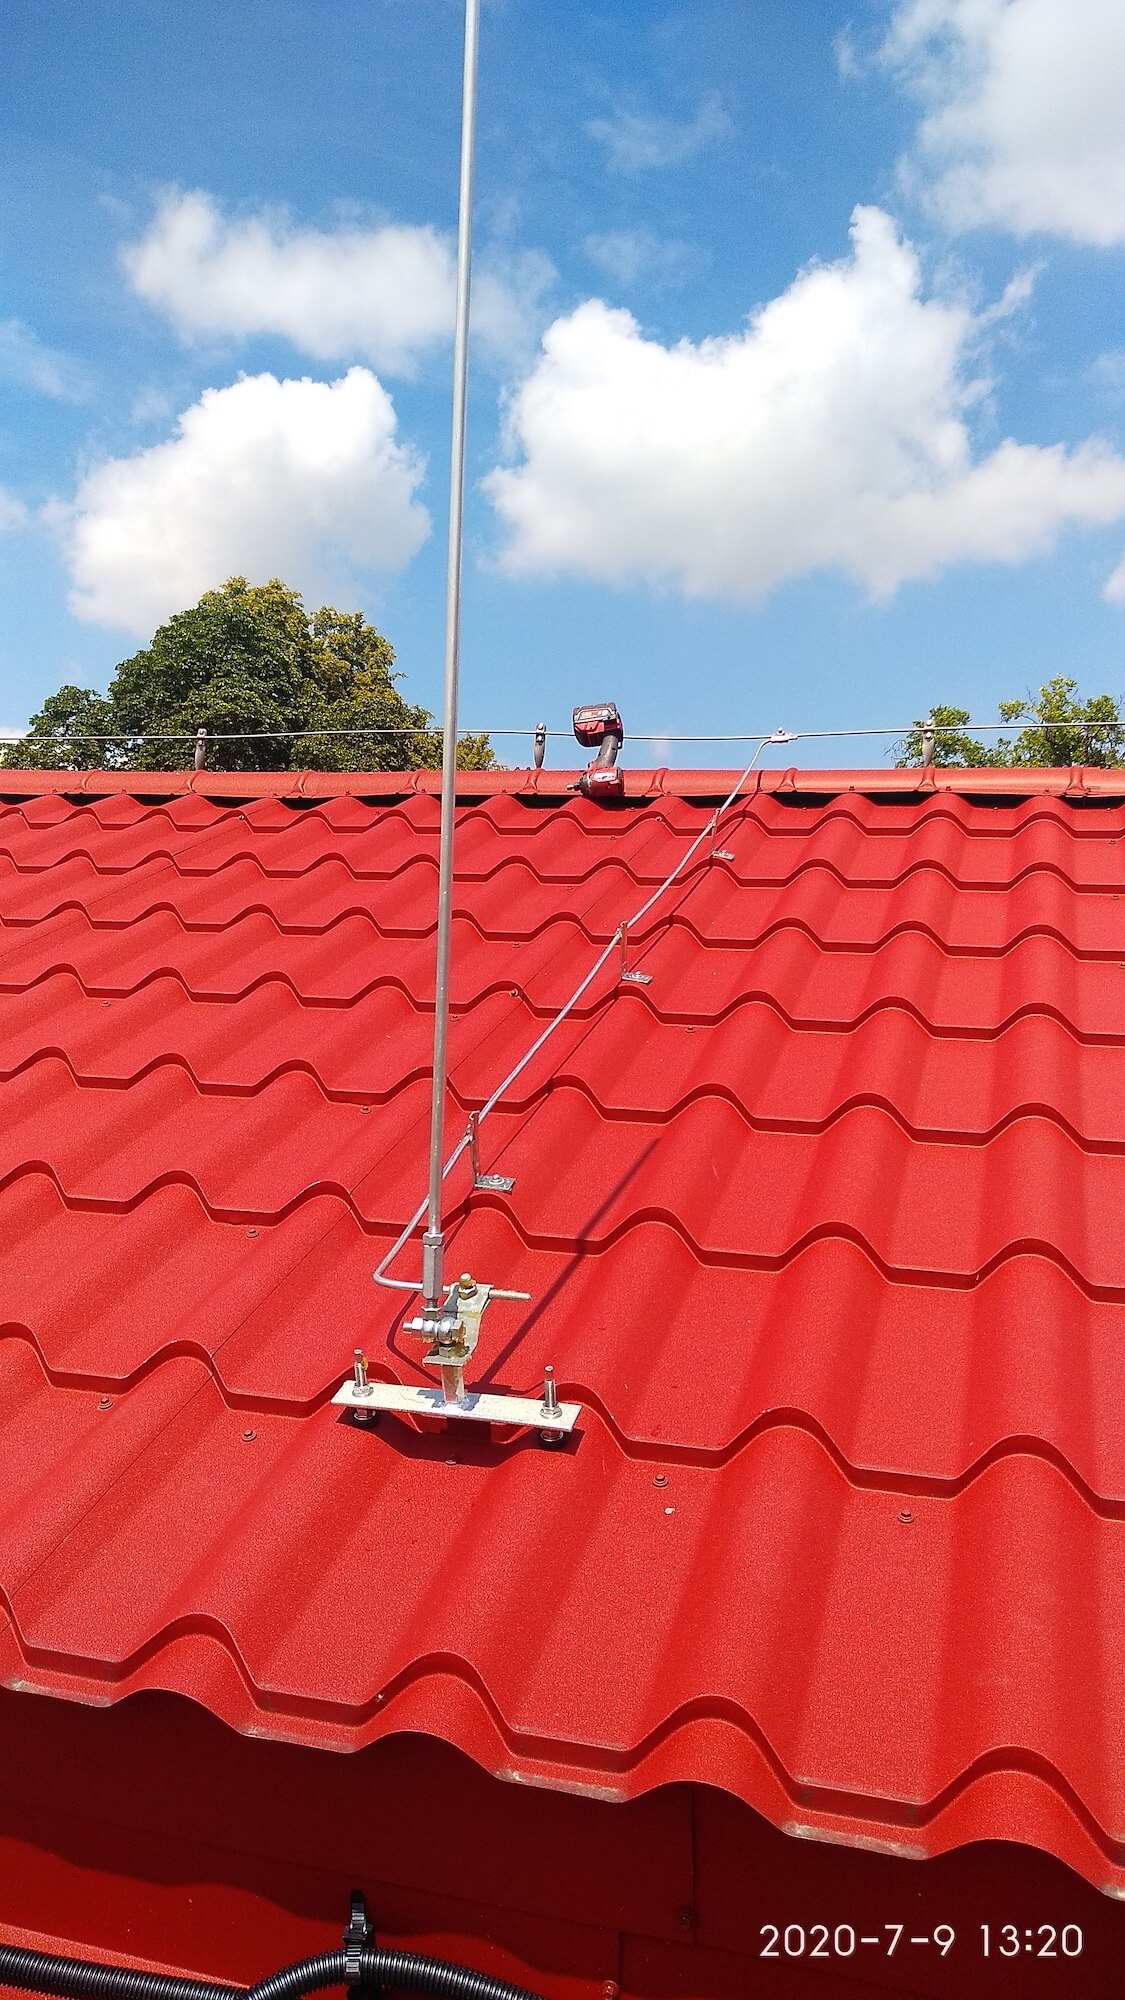 A lightning rod with adjustment to verticality in relation to the slope of the roof, screwed to the structure of the roof covered with steel tiles. FeZn wire guided on screwed angular holders and ridge tile holders